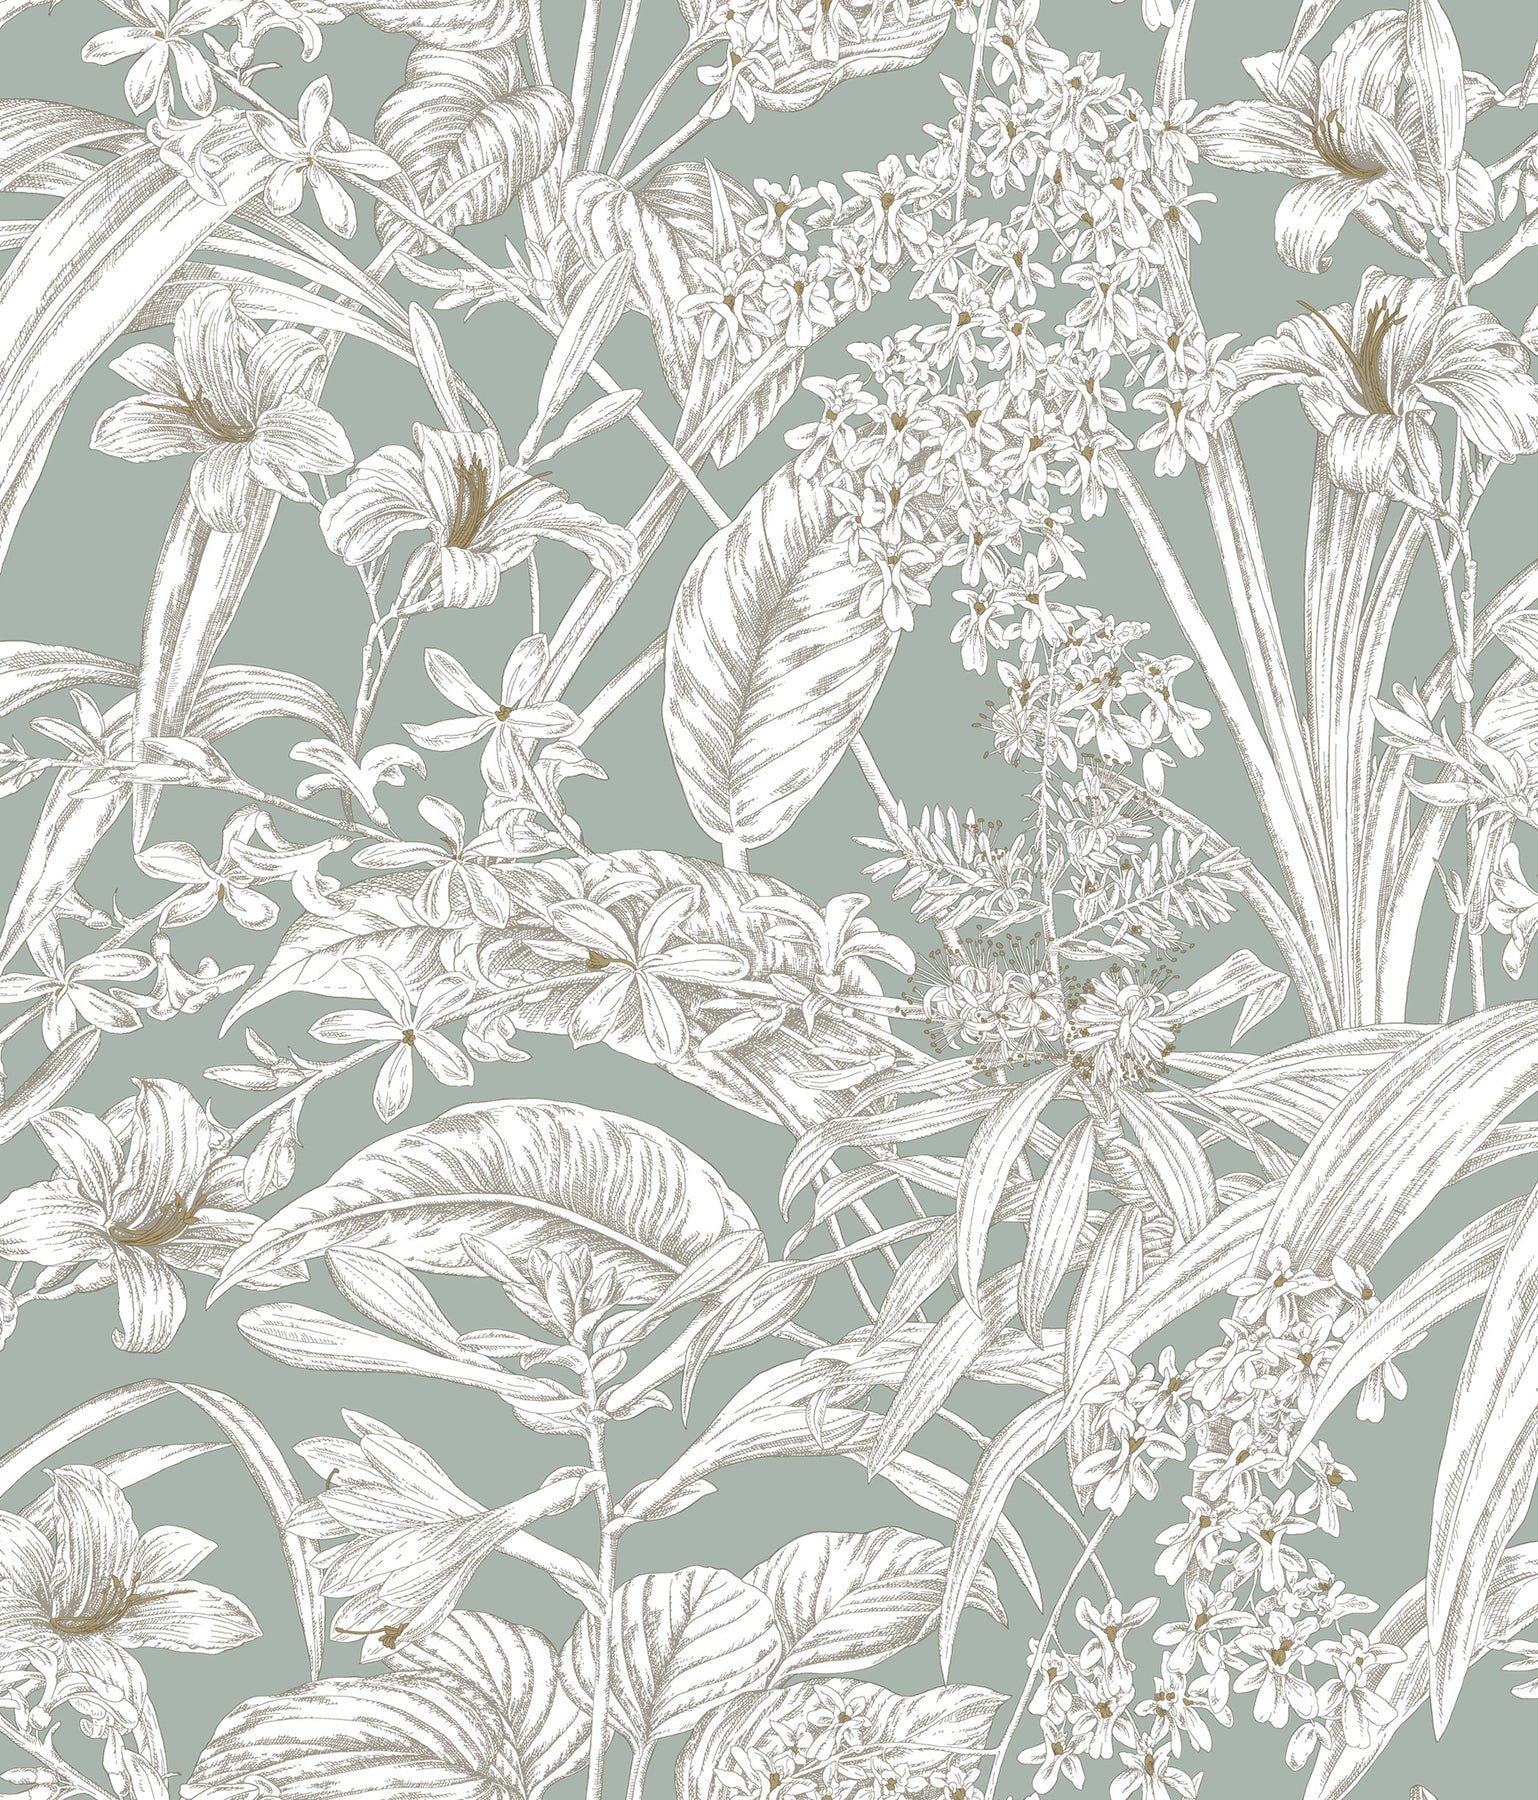 Orchid Conservatory Toile Wallpaper Wallpaper York Wallcoverings Double Roll Seamist/Taupe 